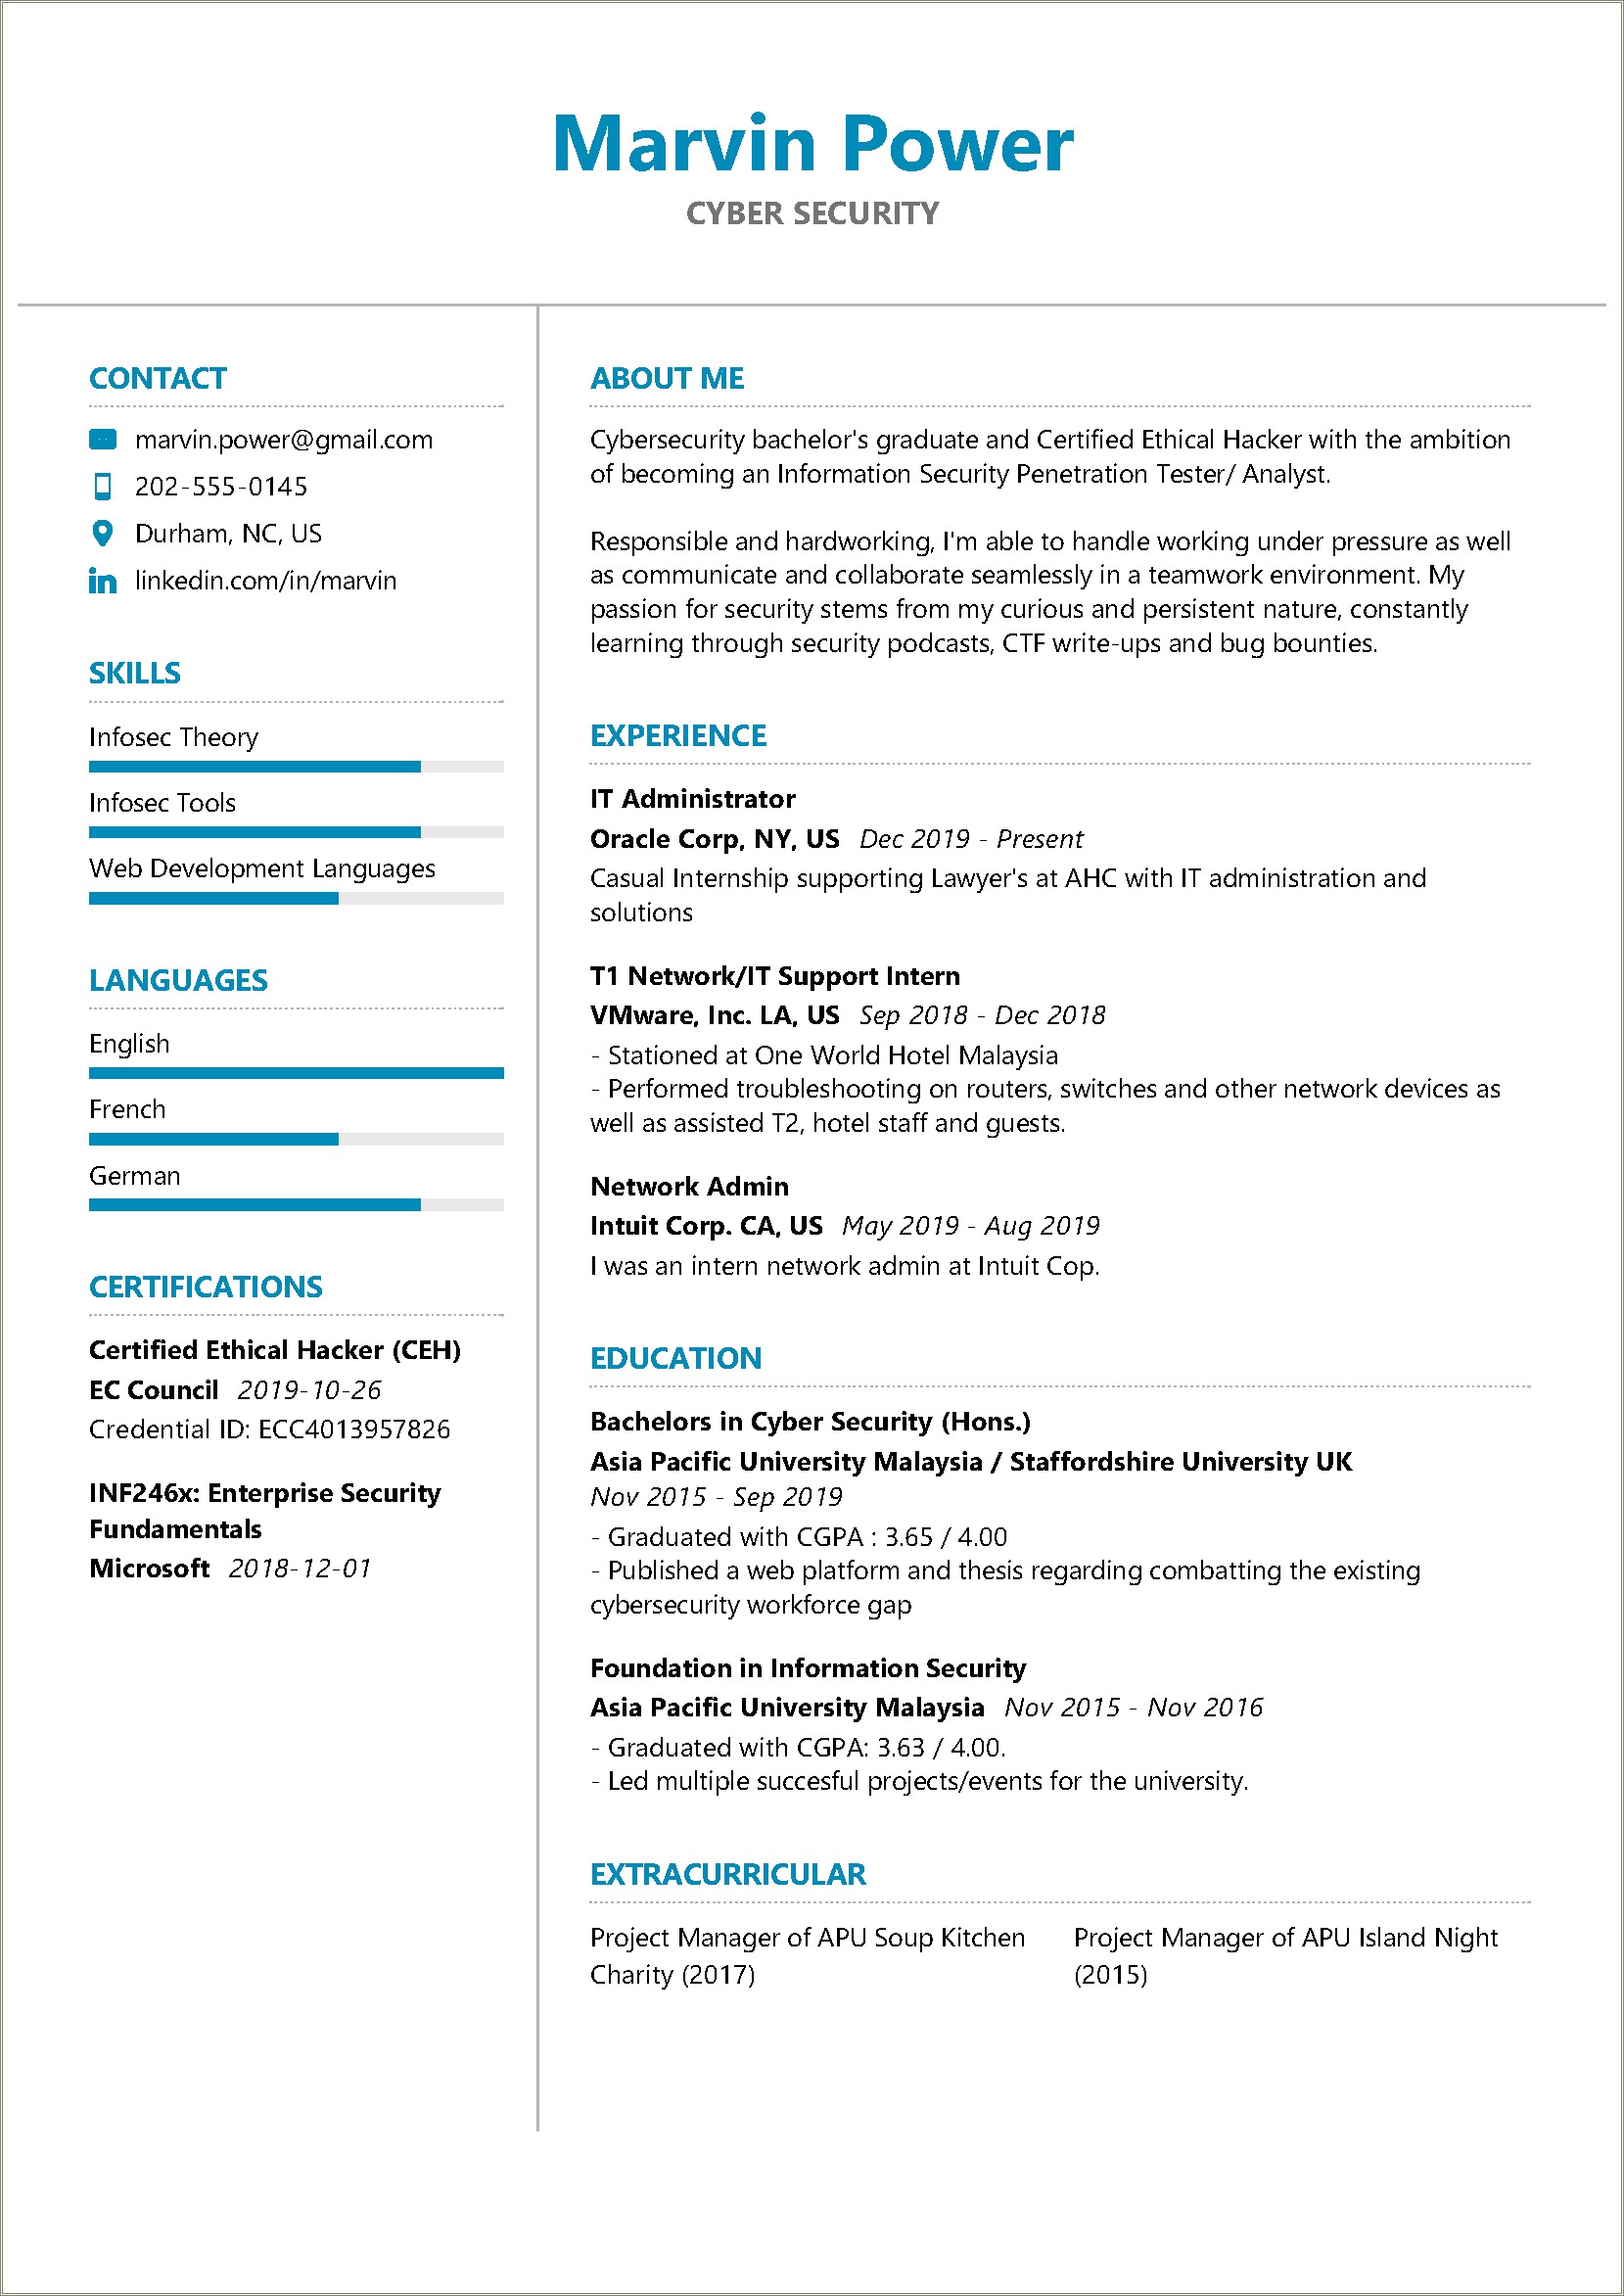 Resume Cover Letter For Cyber Security In College